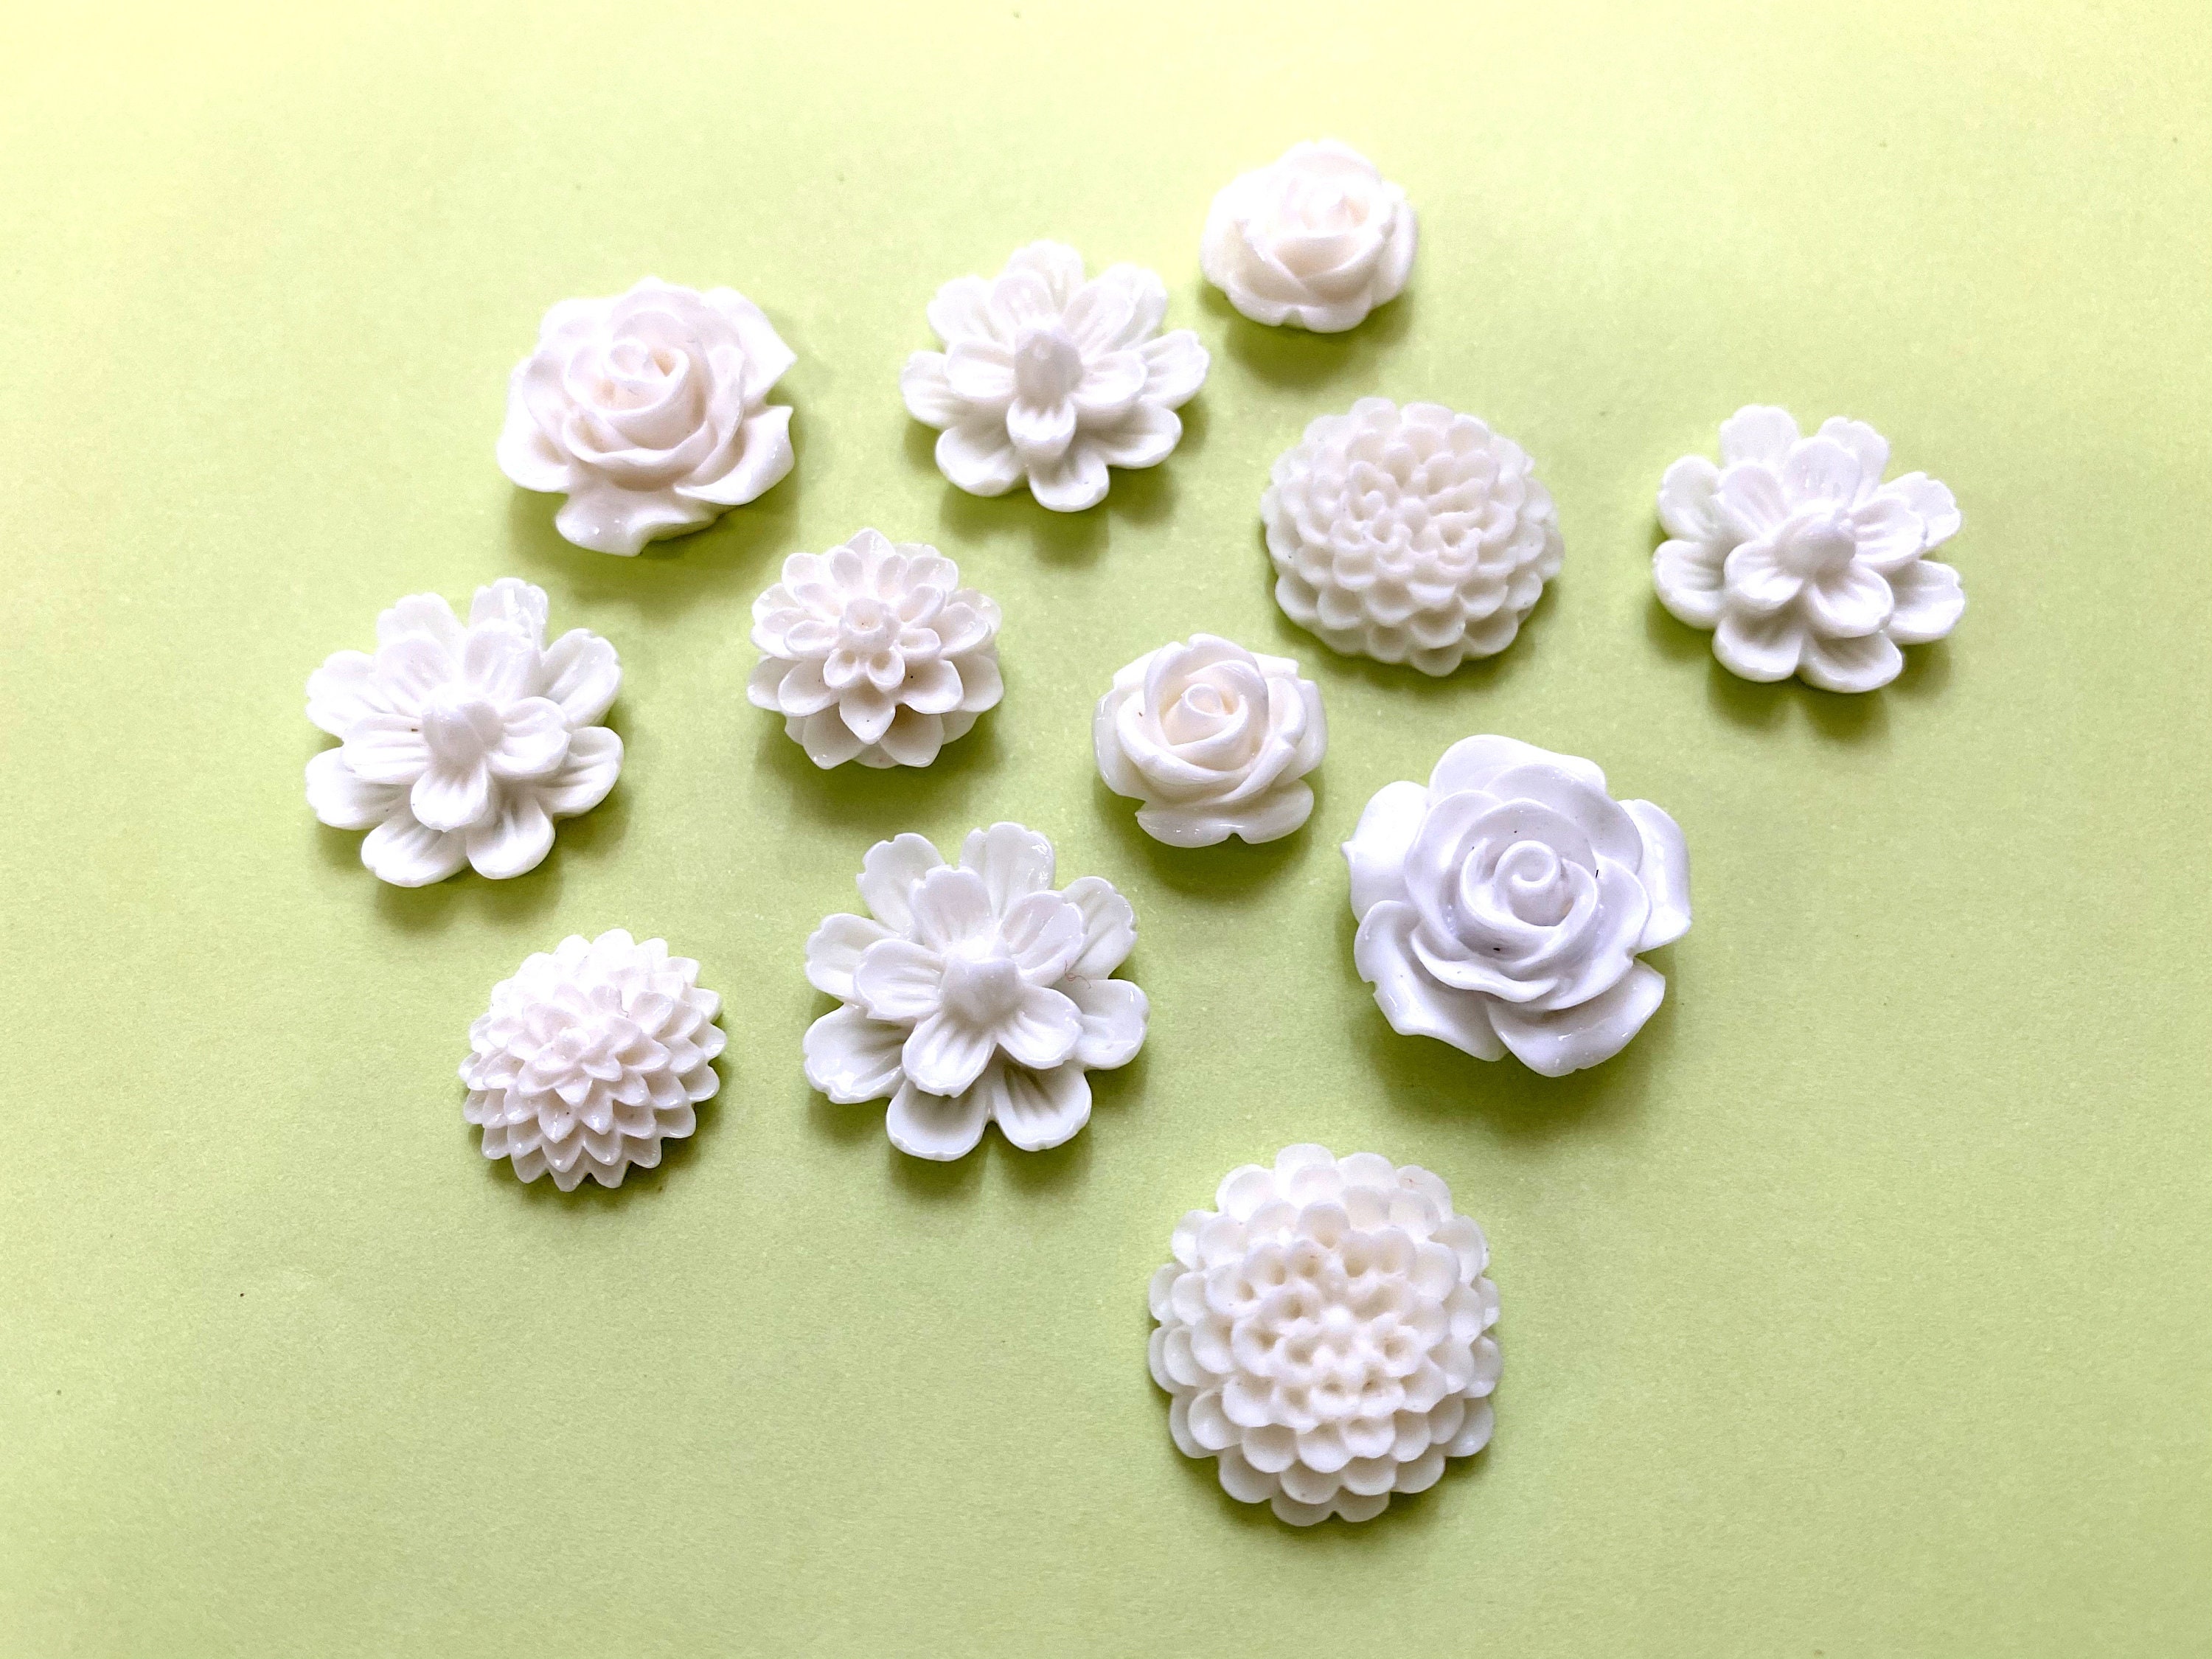 Flower Magnets - Unique Gifts of Nature Inspired Home Decor!